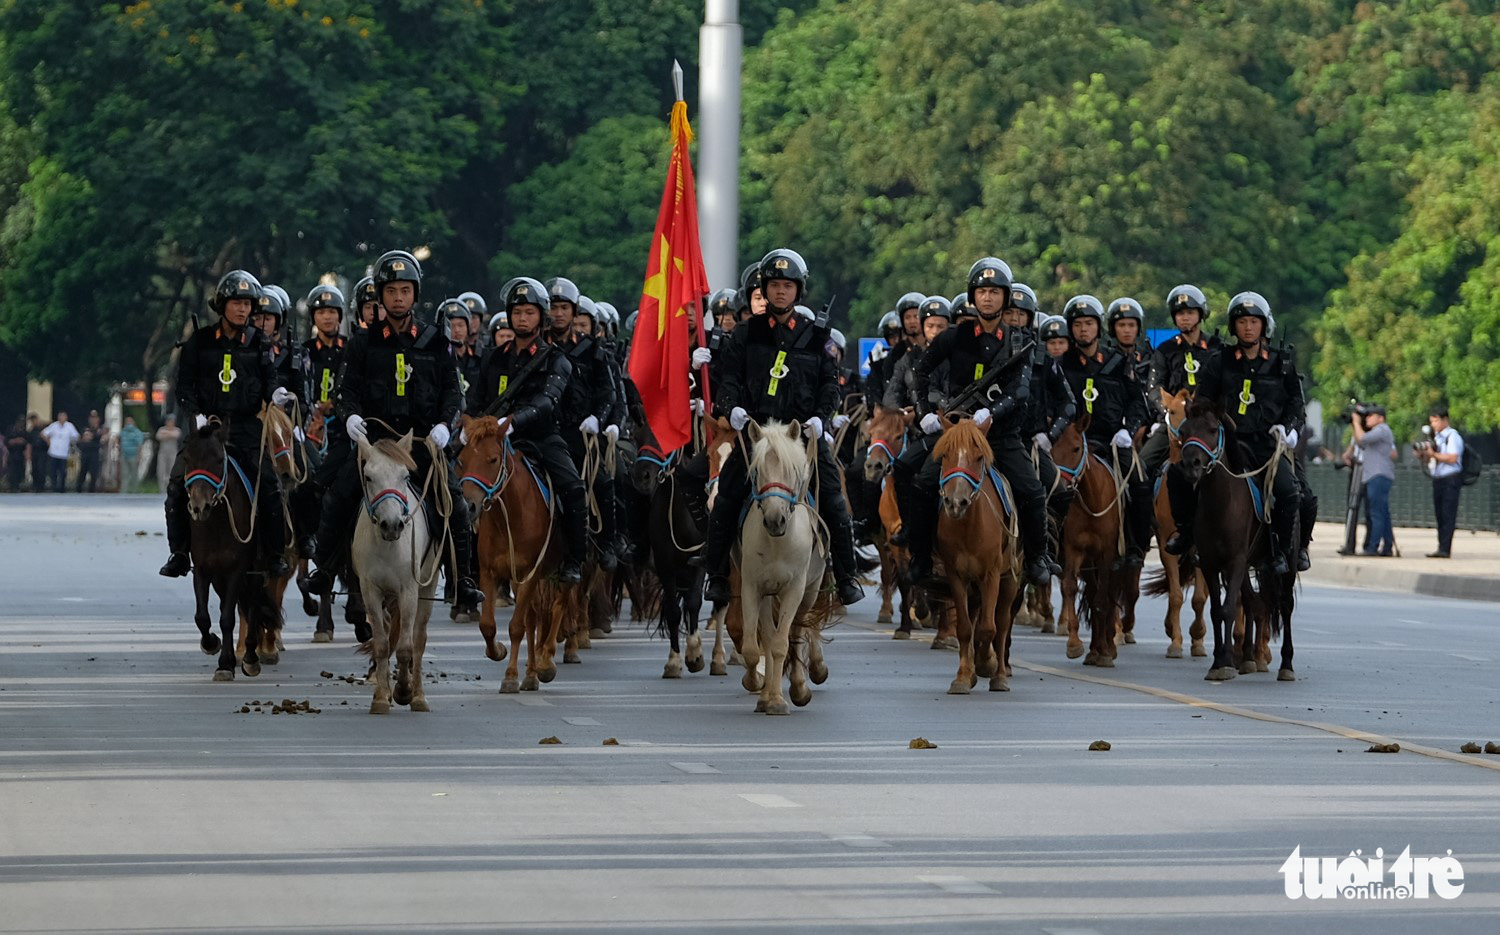 Officers from the Mounted Mobile Police Corps march during a ceremony at Ba Dinh Square in Hanoi, Vietnam, June 8, 2020. Photo: Tien Long / Tuoi Tre